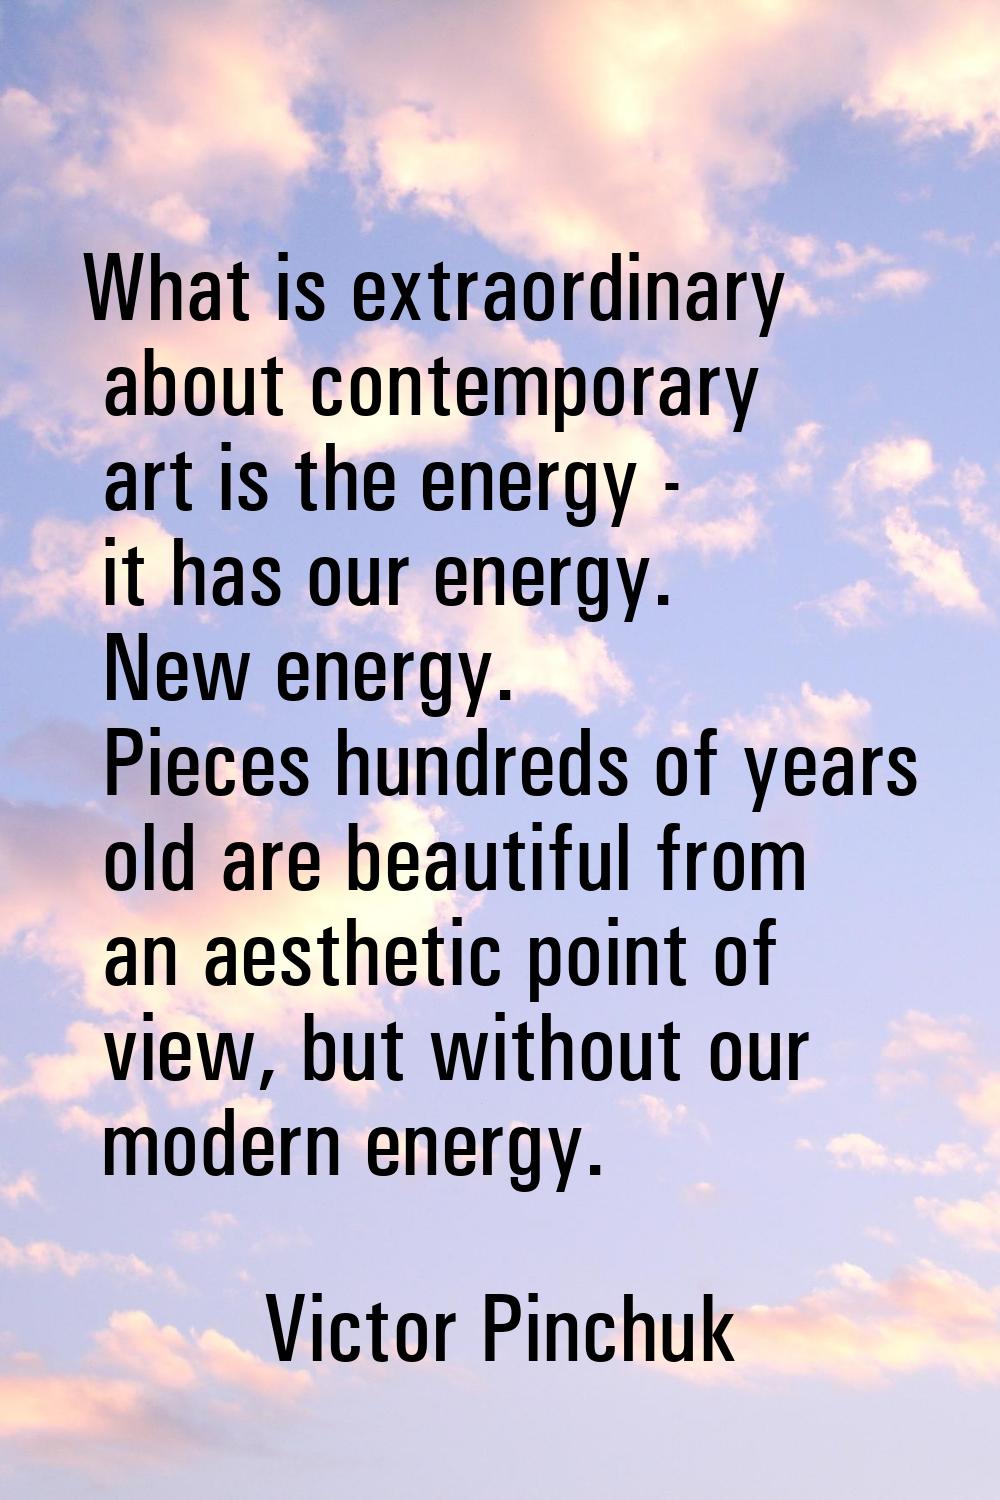 What is extraordinary about contemporary art is the energy - it has our energy. New energy. Pieces 